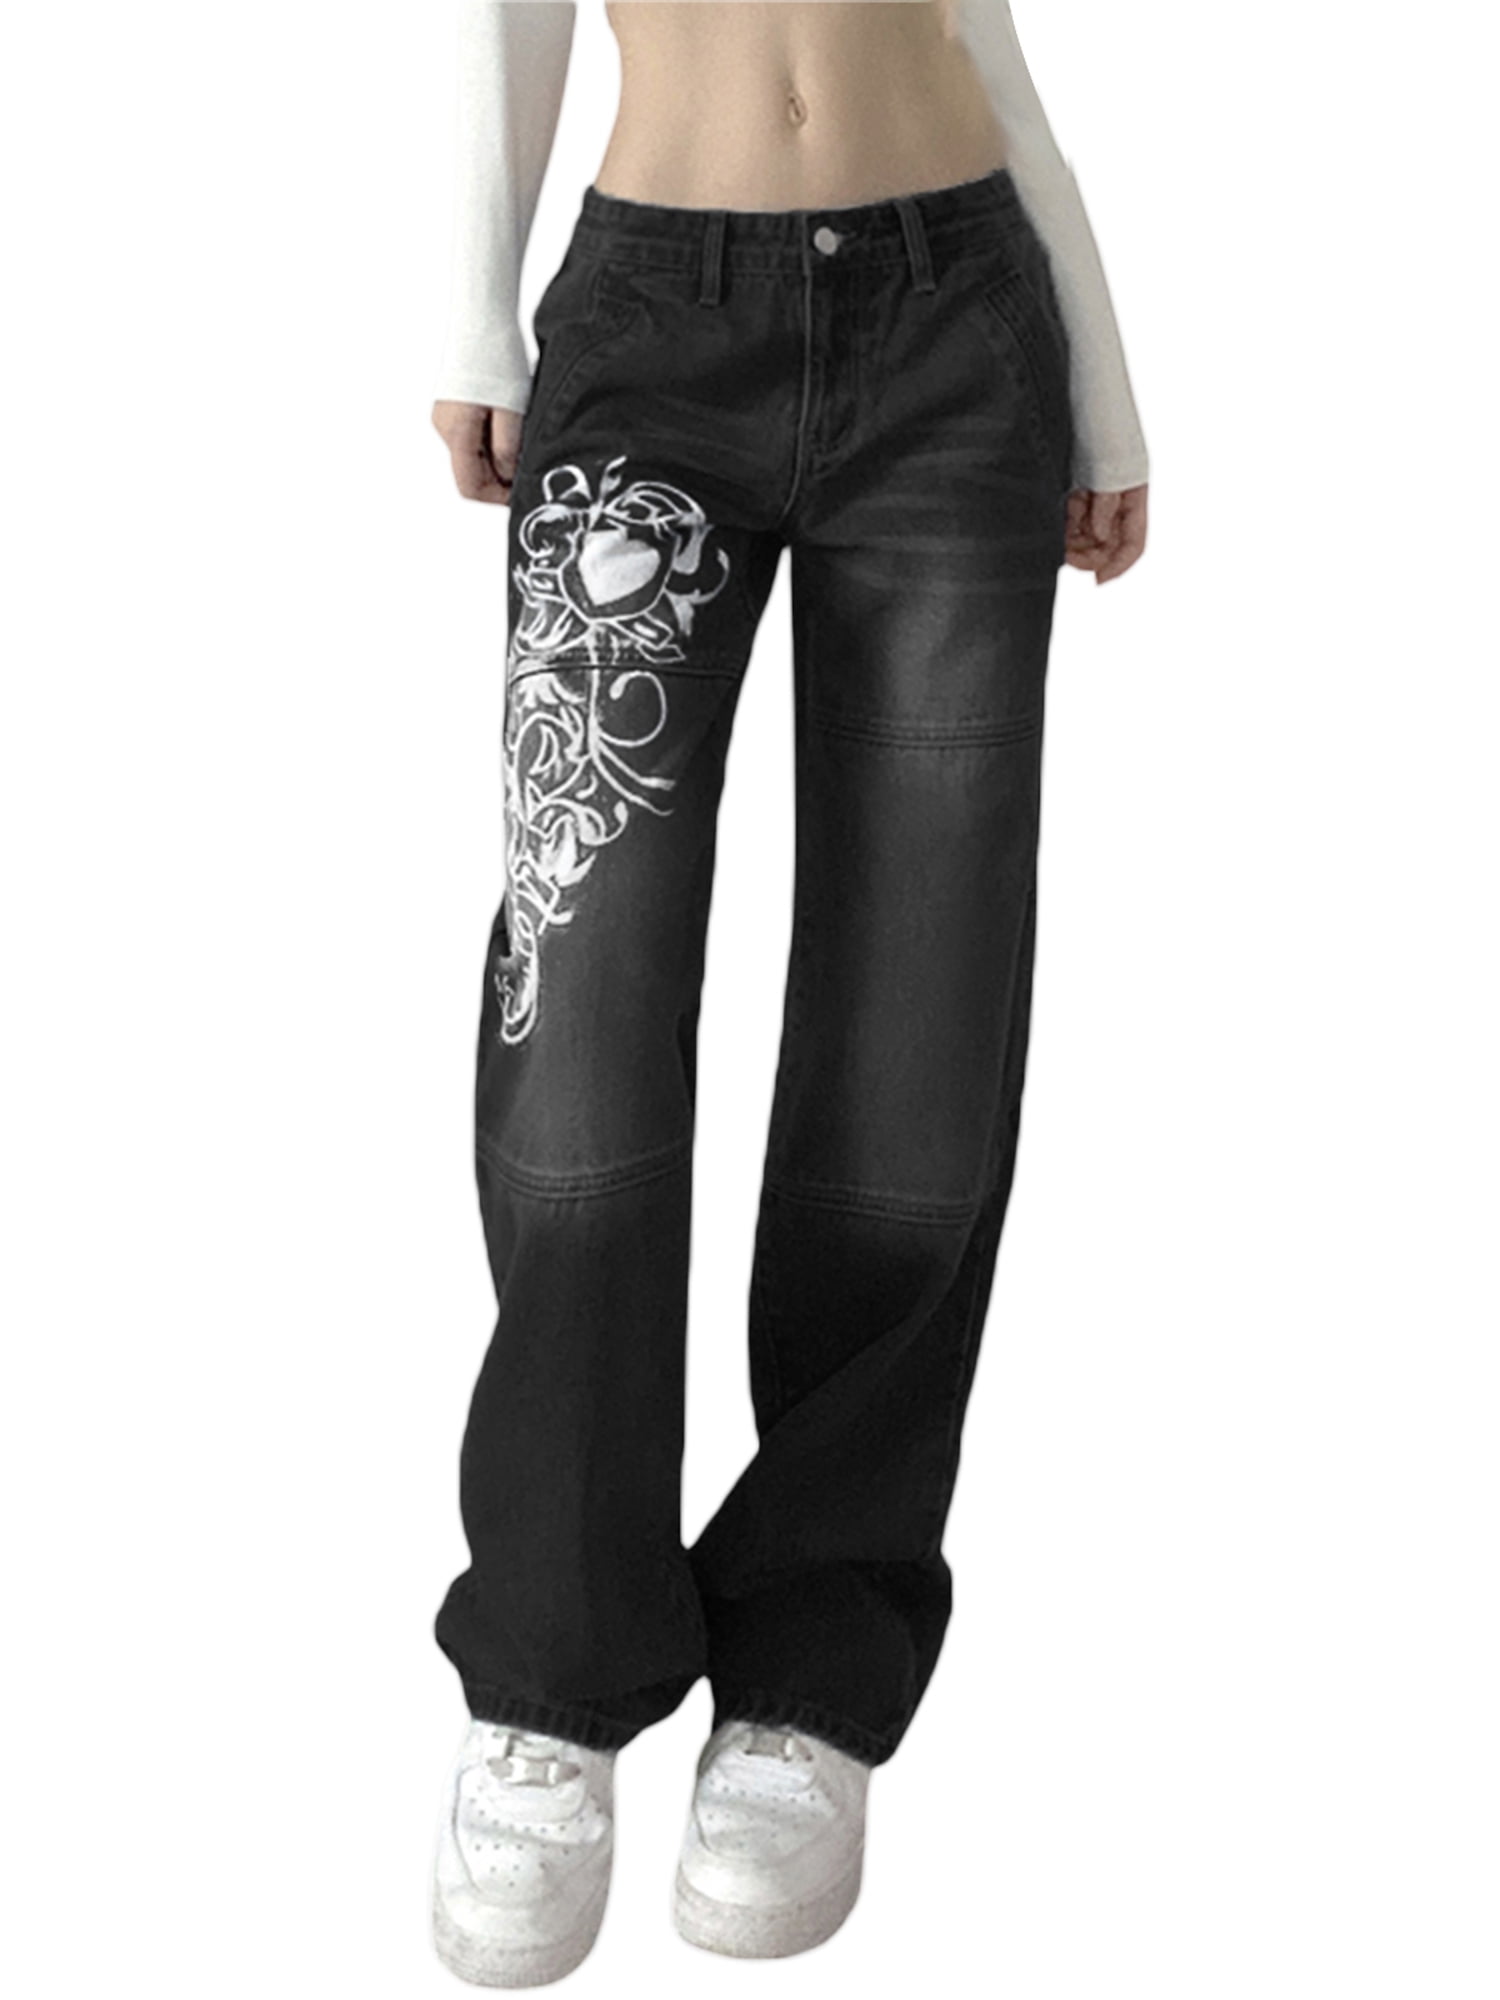 Baggy Jeans,Daniya Collection Black Bell bottom Jeans for Girls and Women,  Fashionable Jeans for Girls